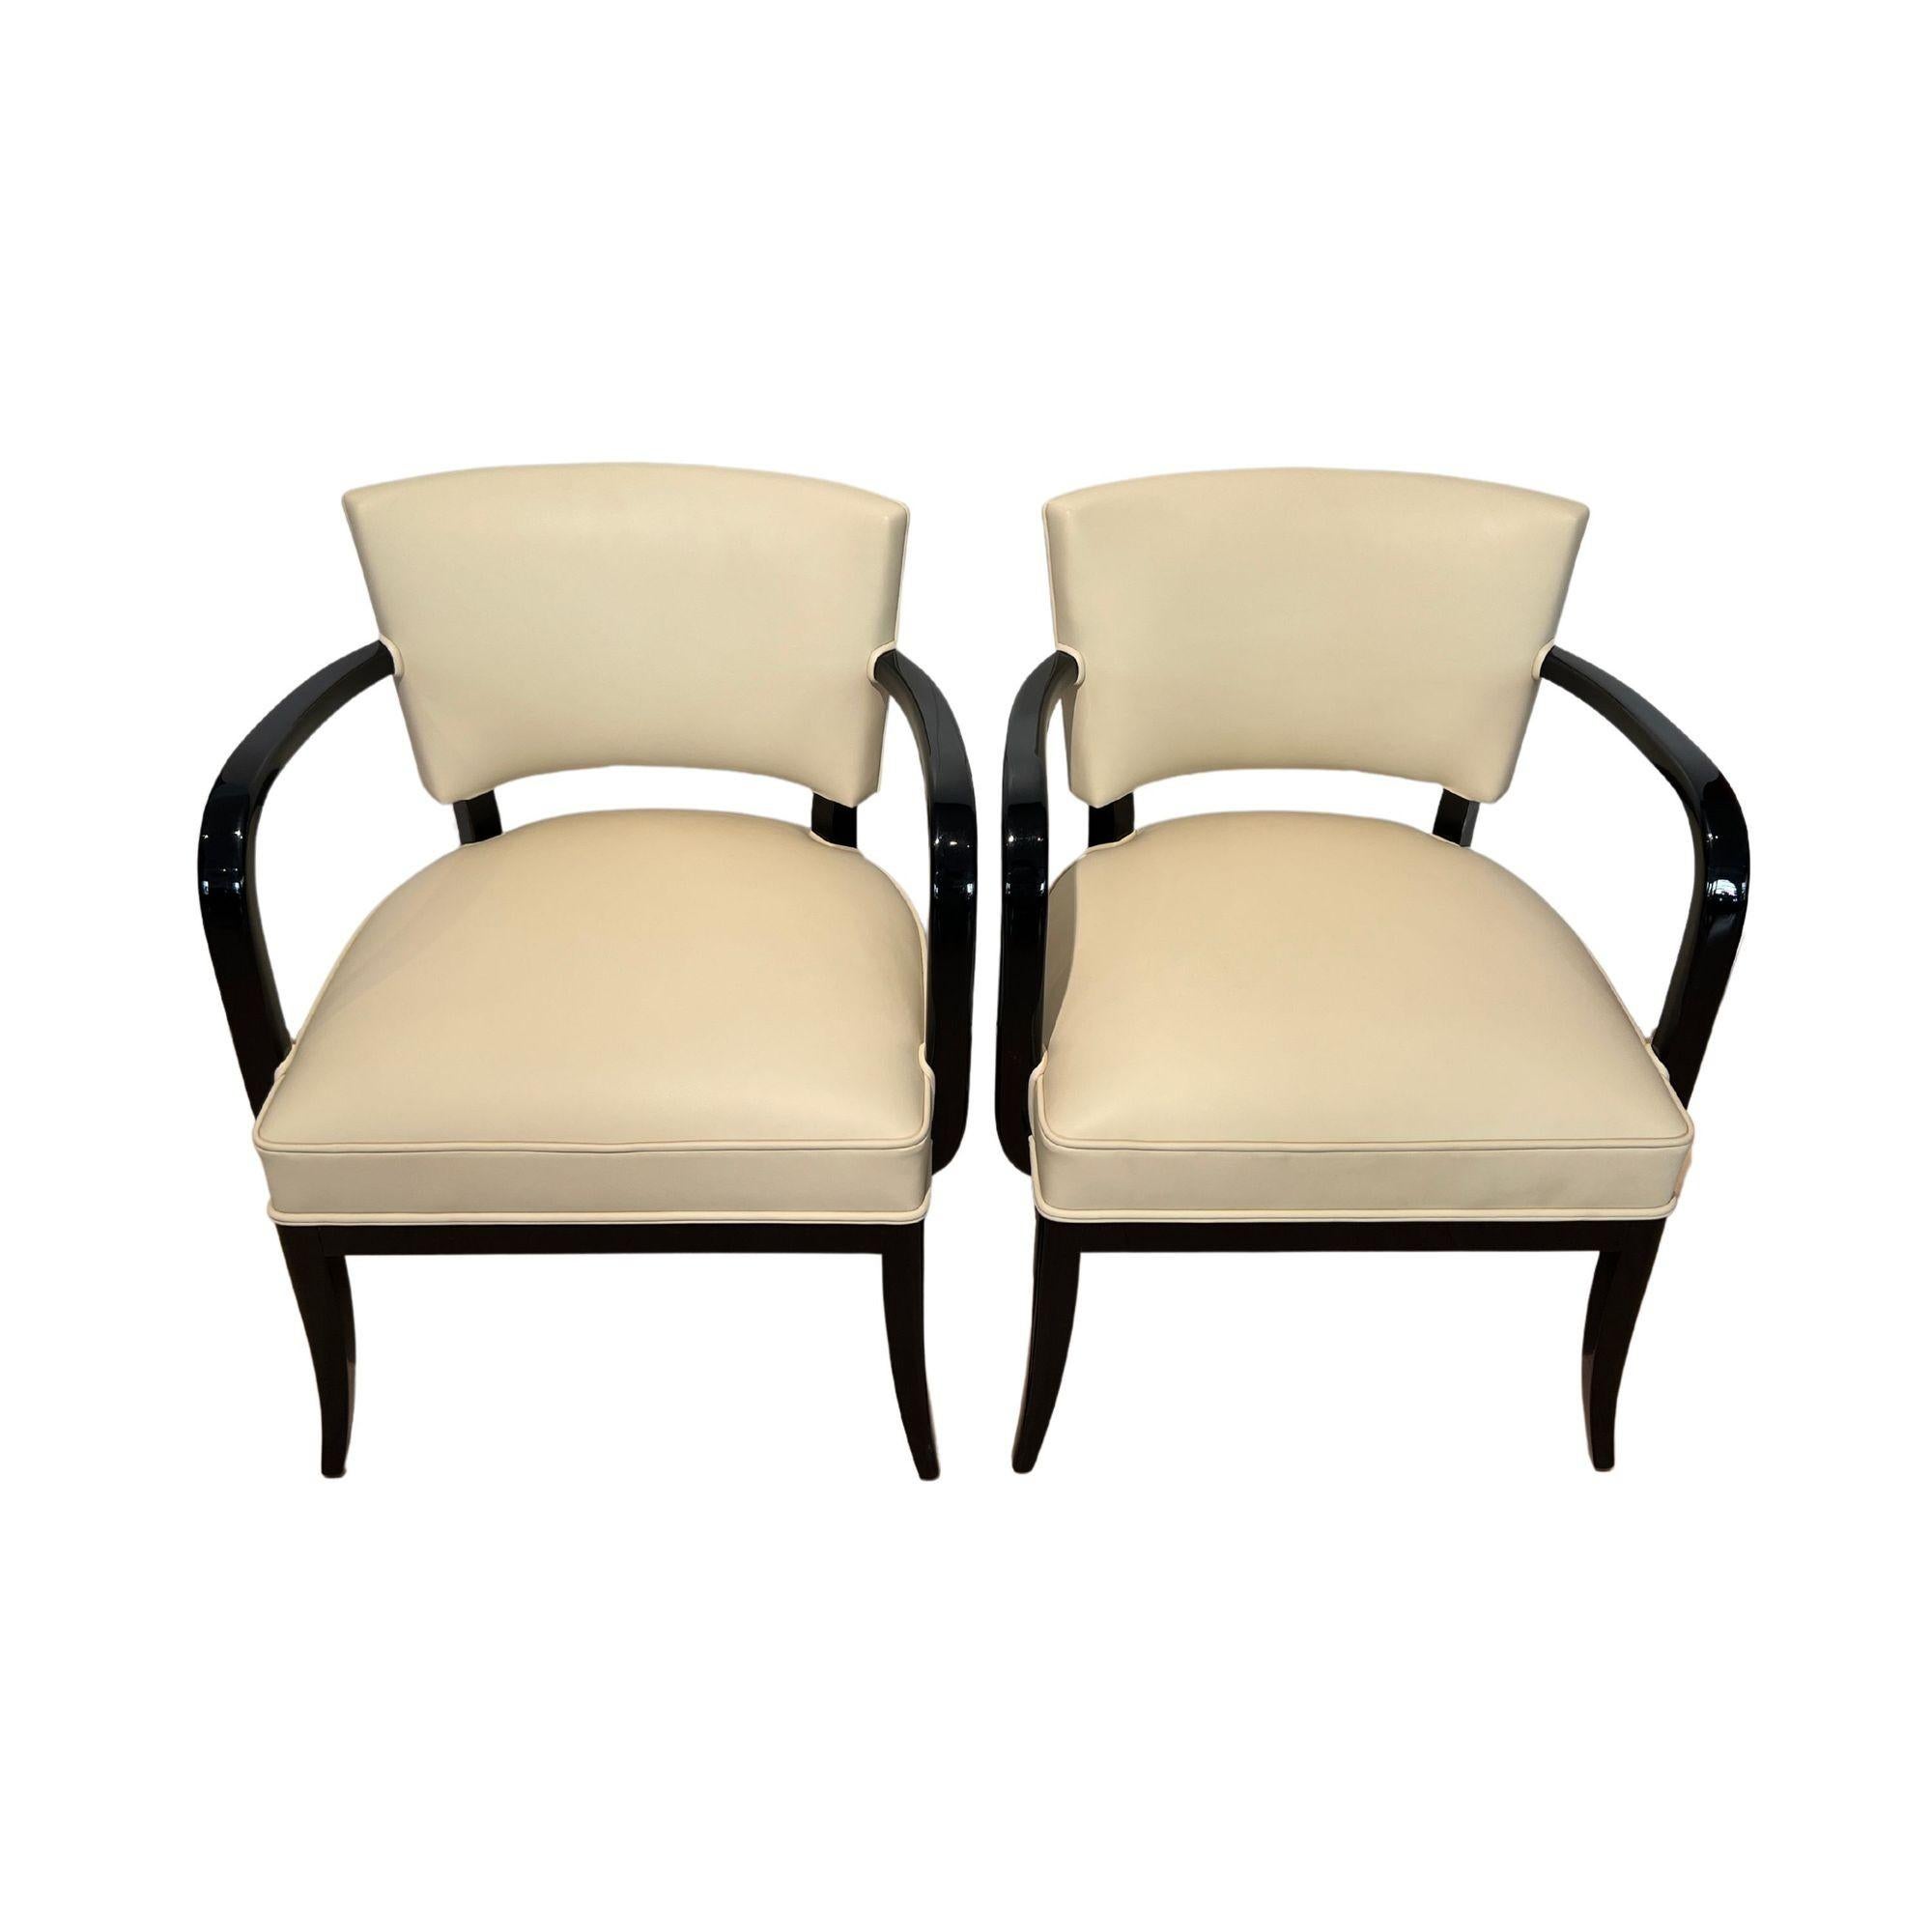 French Pair of Art Deco Armchairs, Black Lacquer, Creme Leather, France, 1930s For Sale